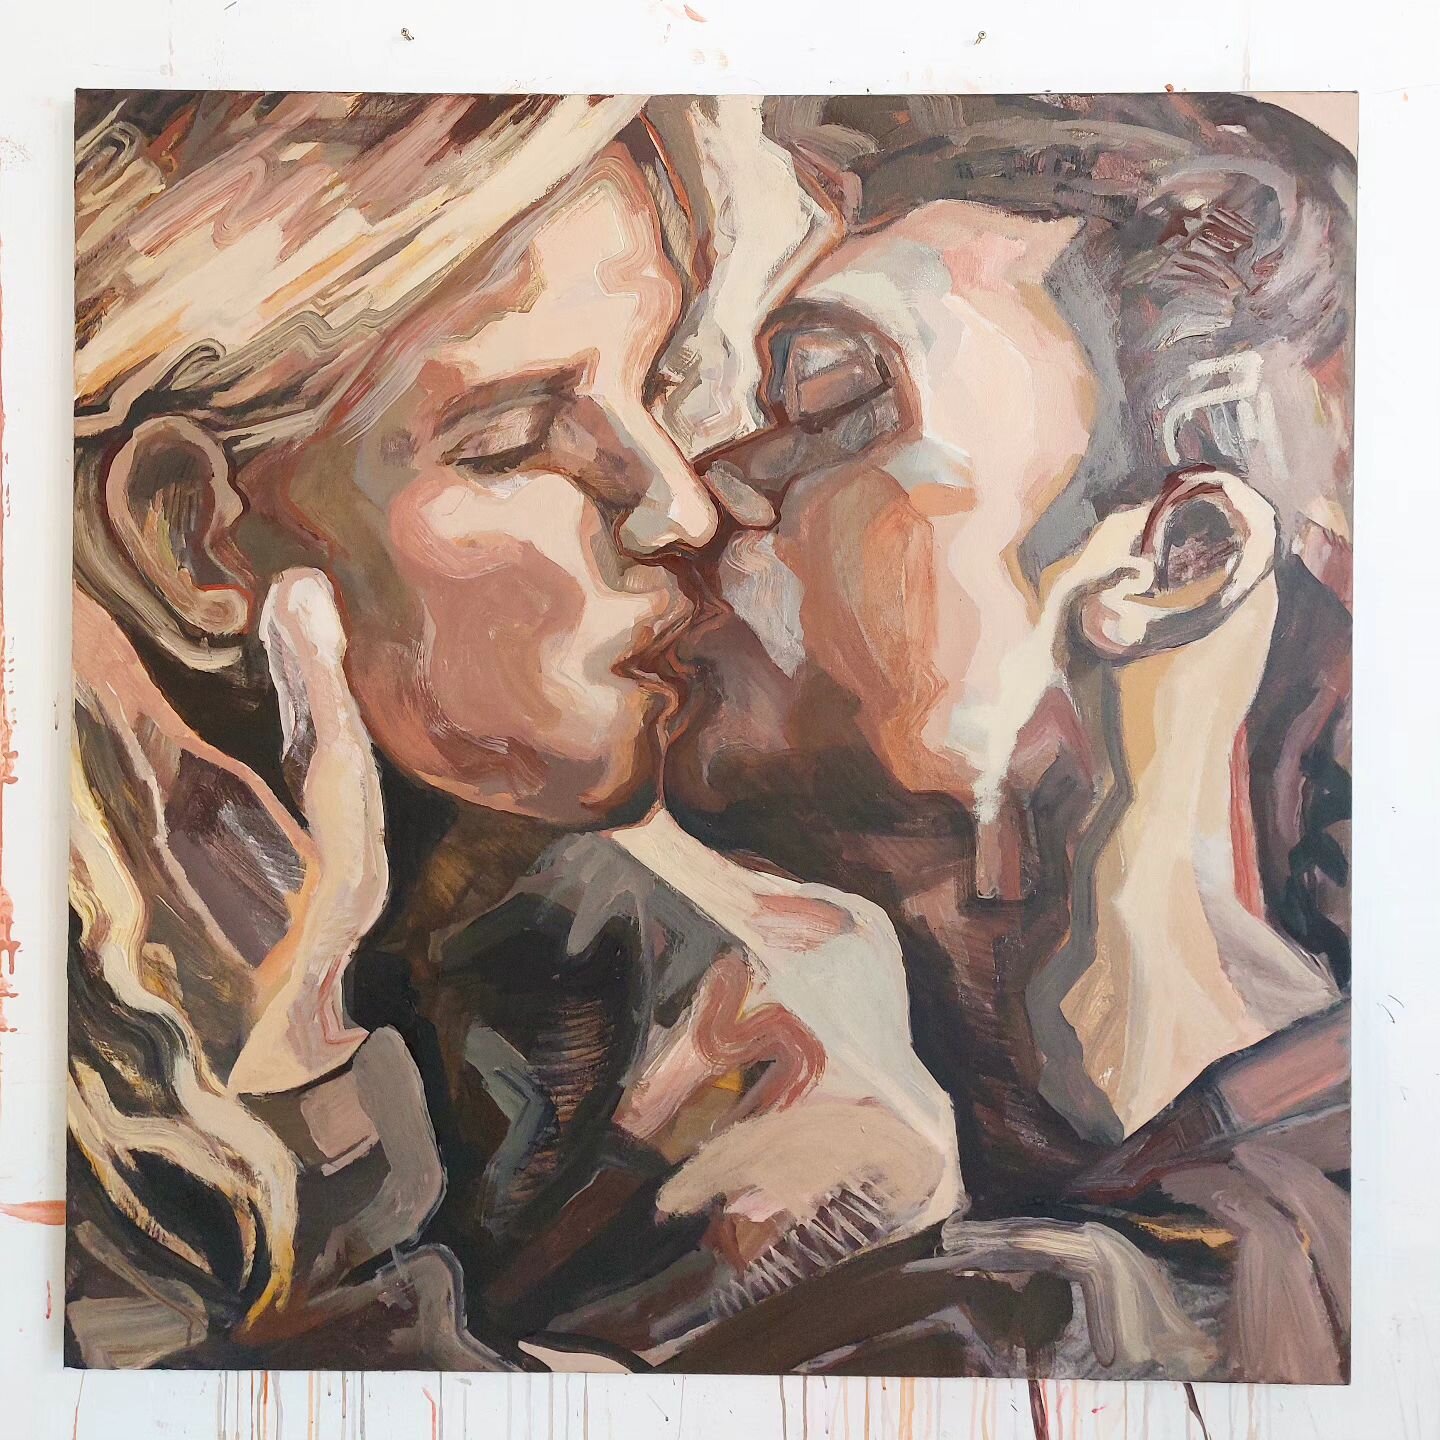 Private art kiss-mission well underway 💋💋💋